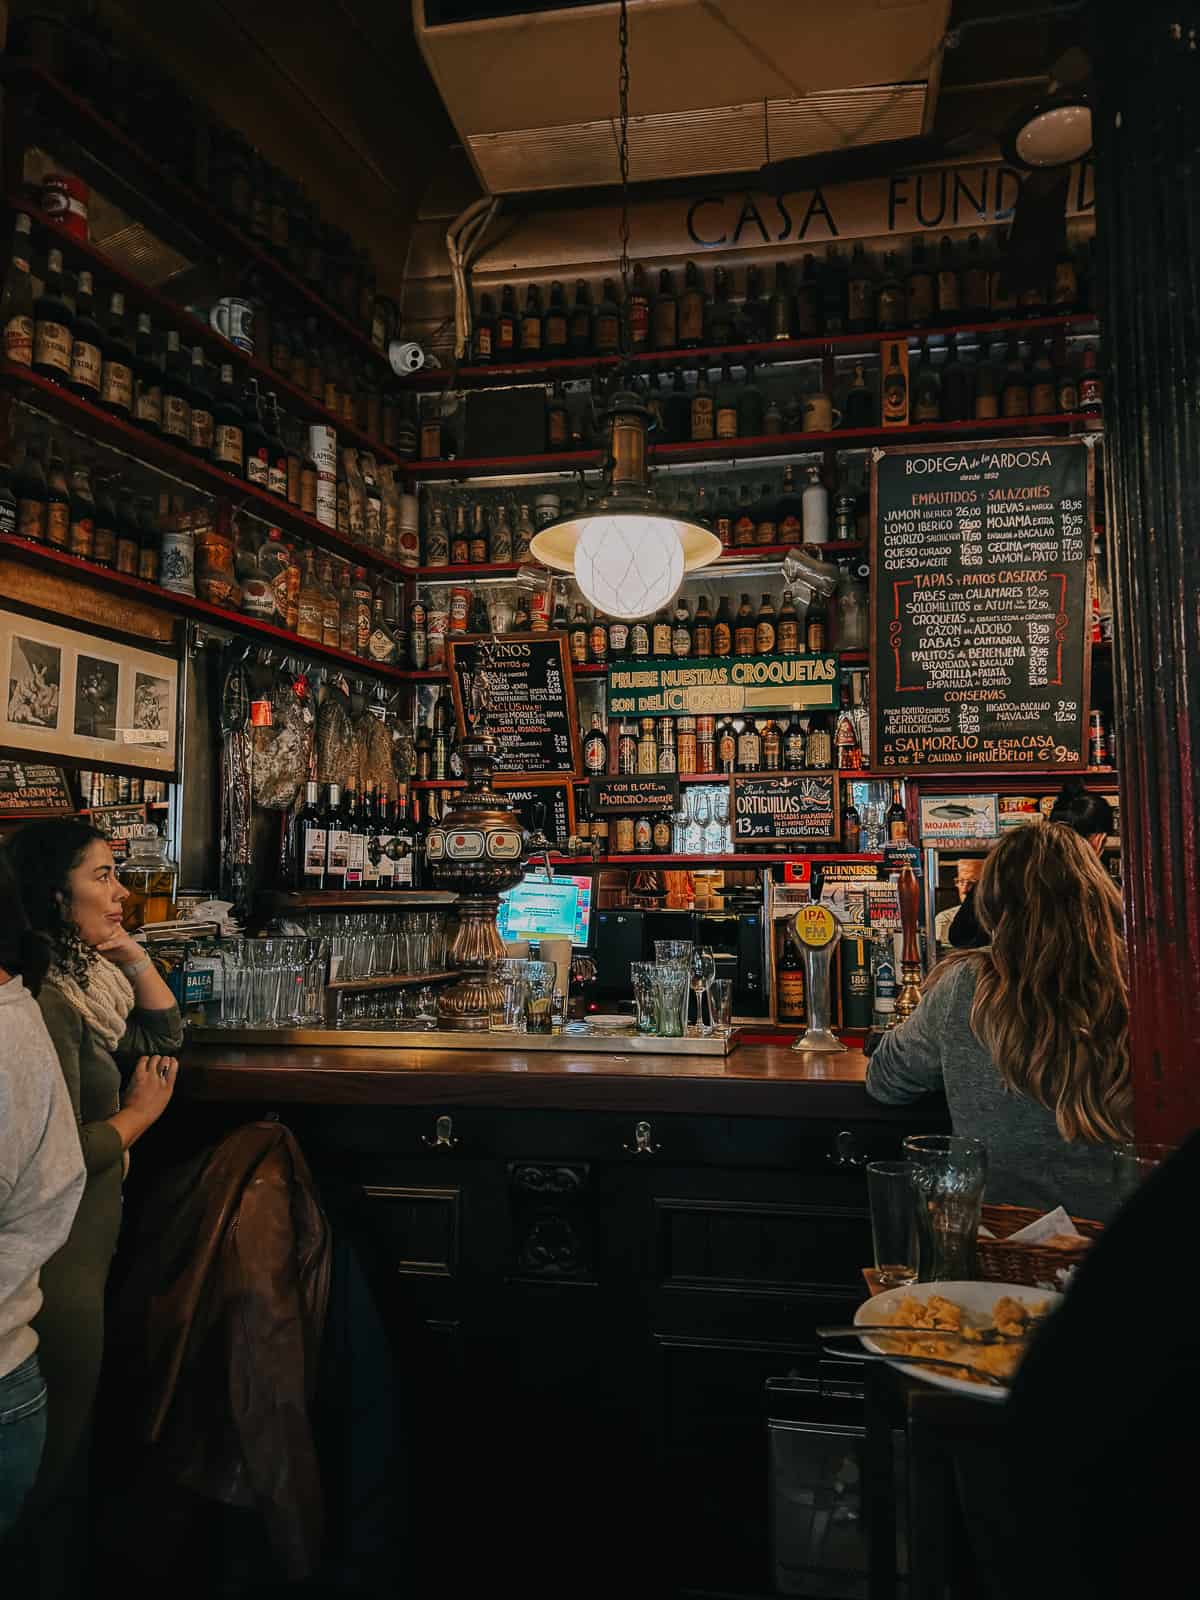 These Are The 9 Best Vermouth Bars in Madrid That Missing Would Be An Actual Crime